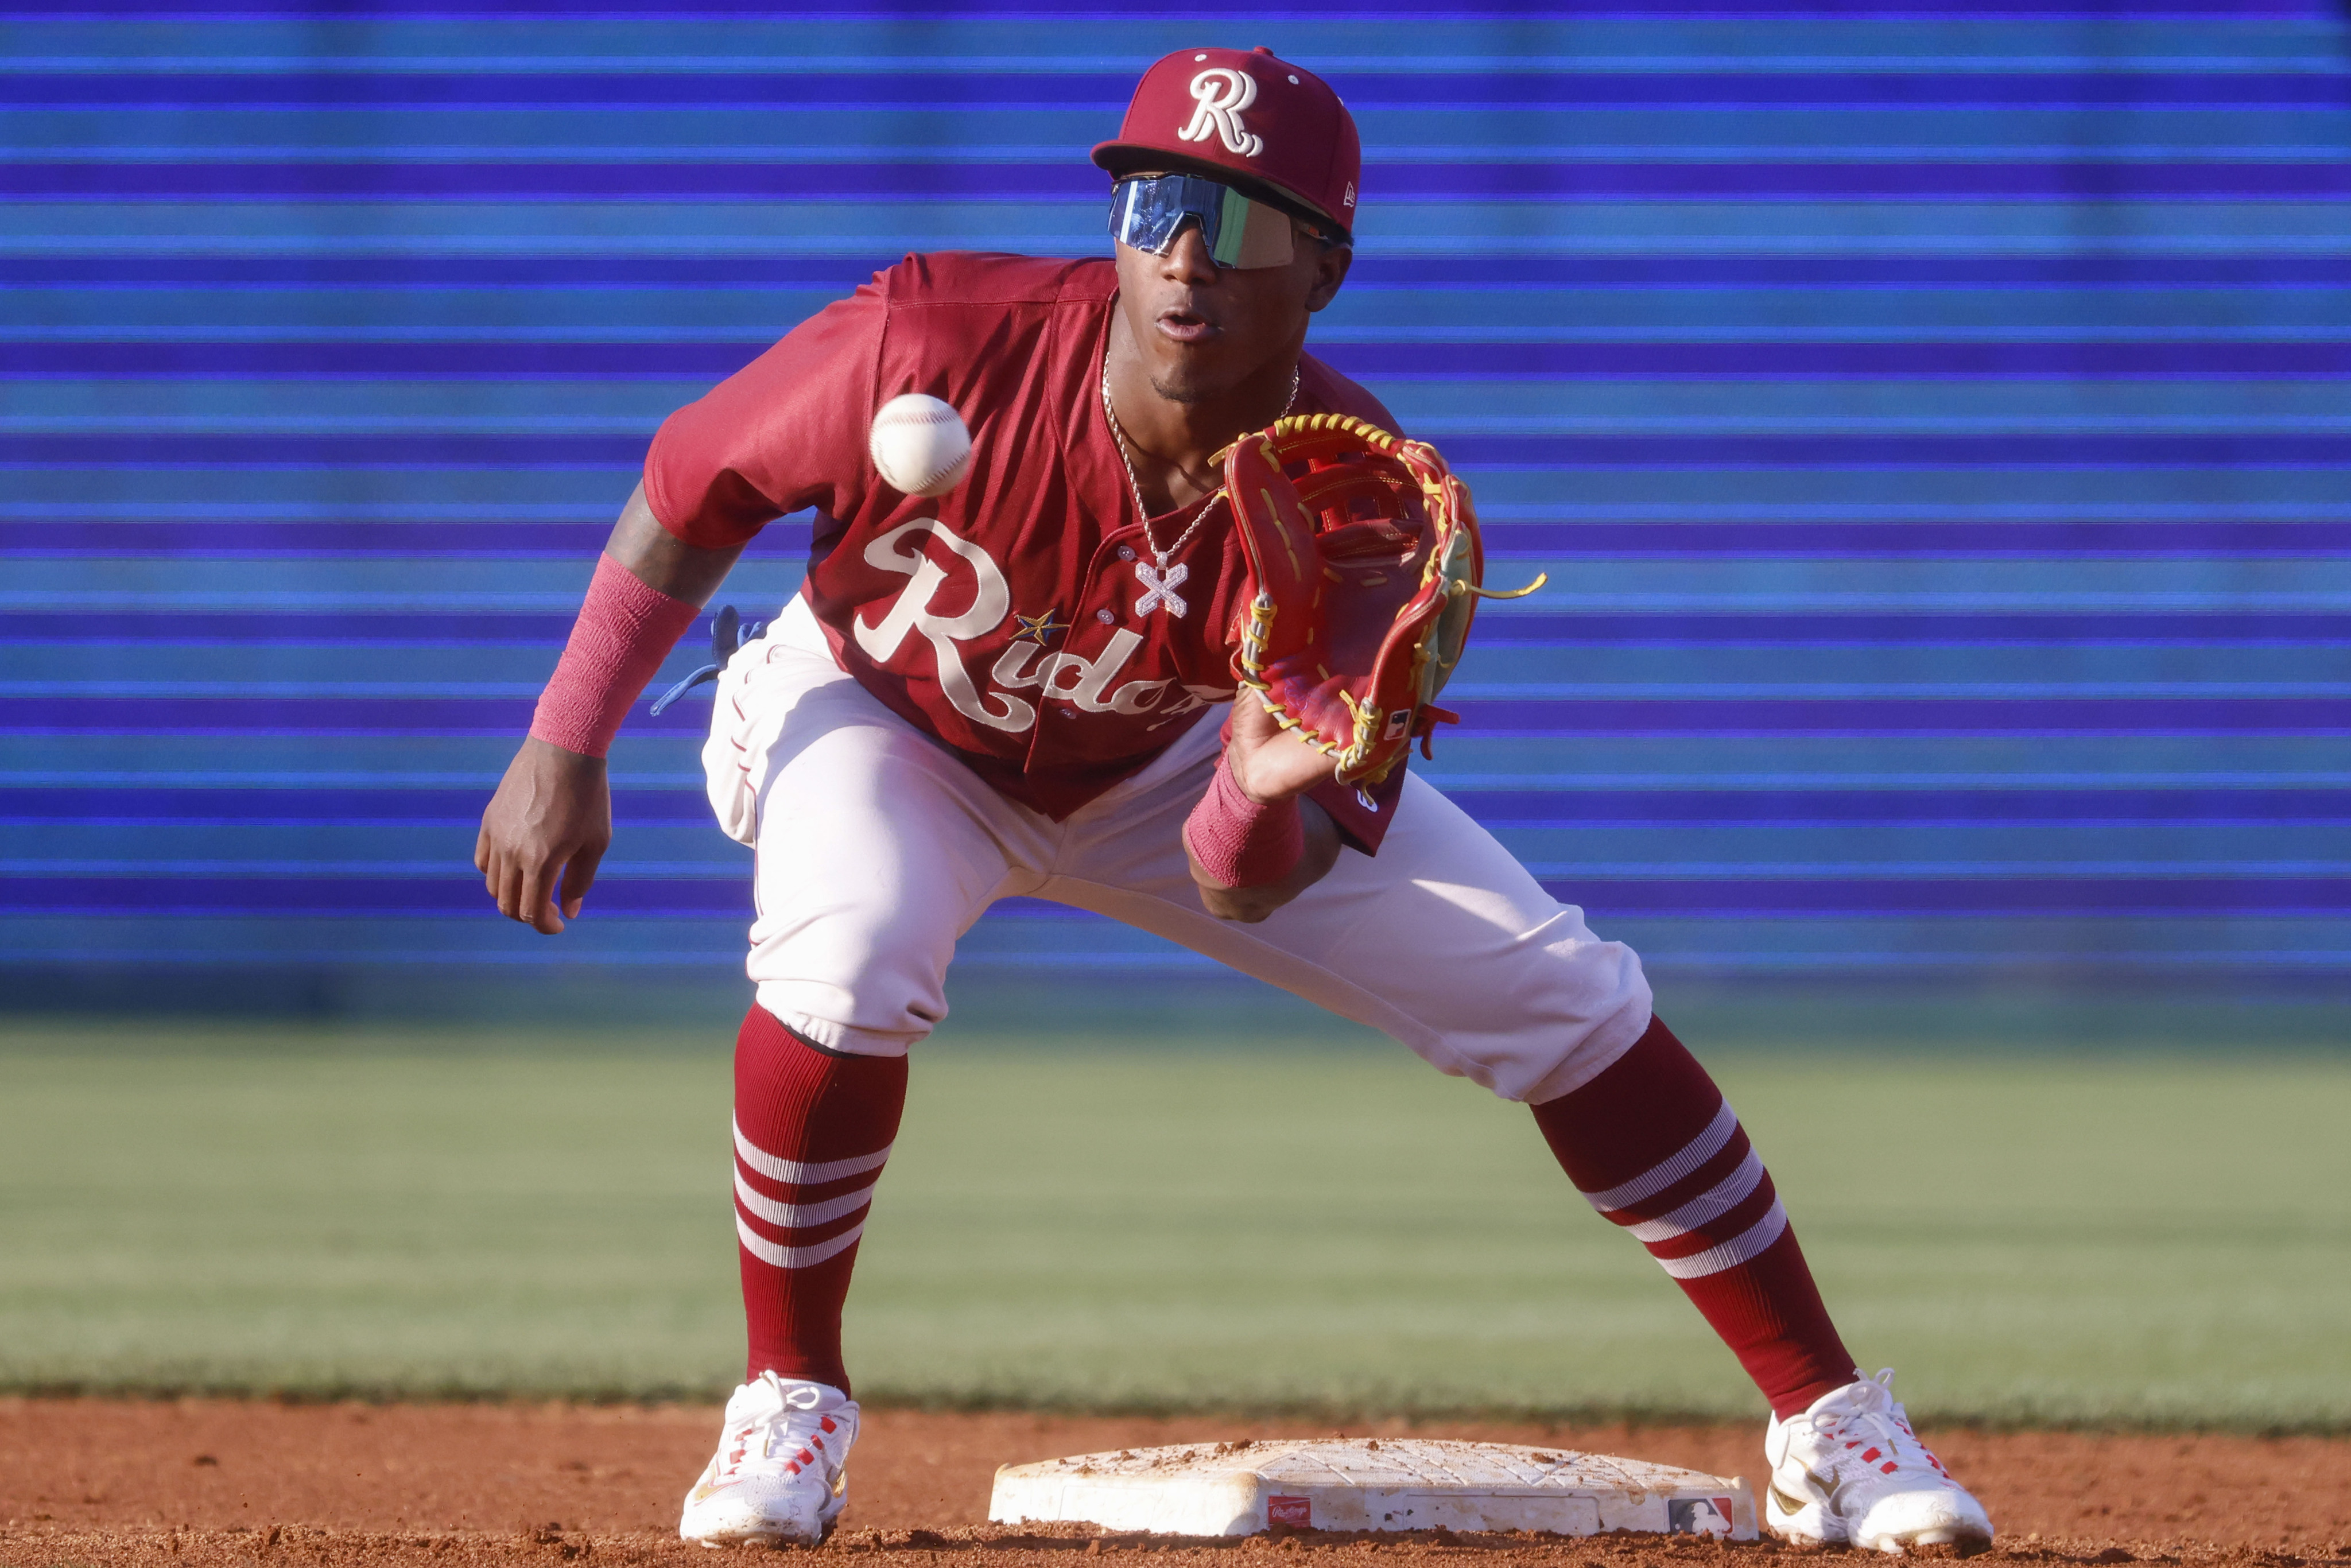 Atlanta Braves Scouting Report on Outfielder Ronald Acuna